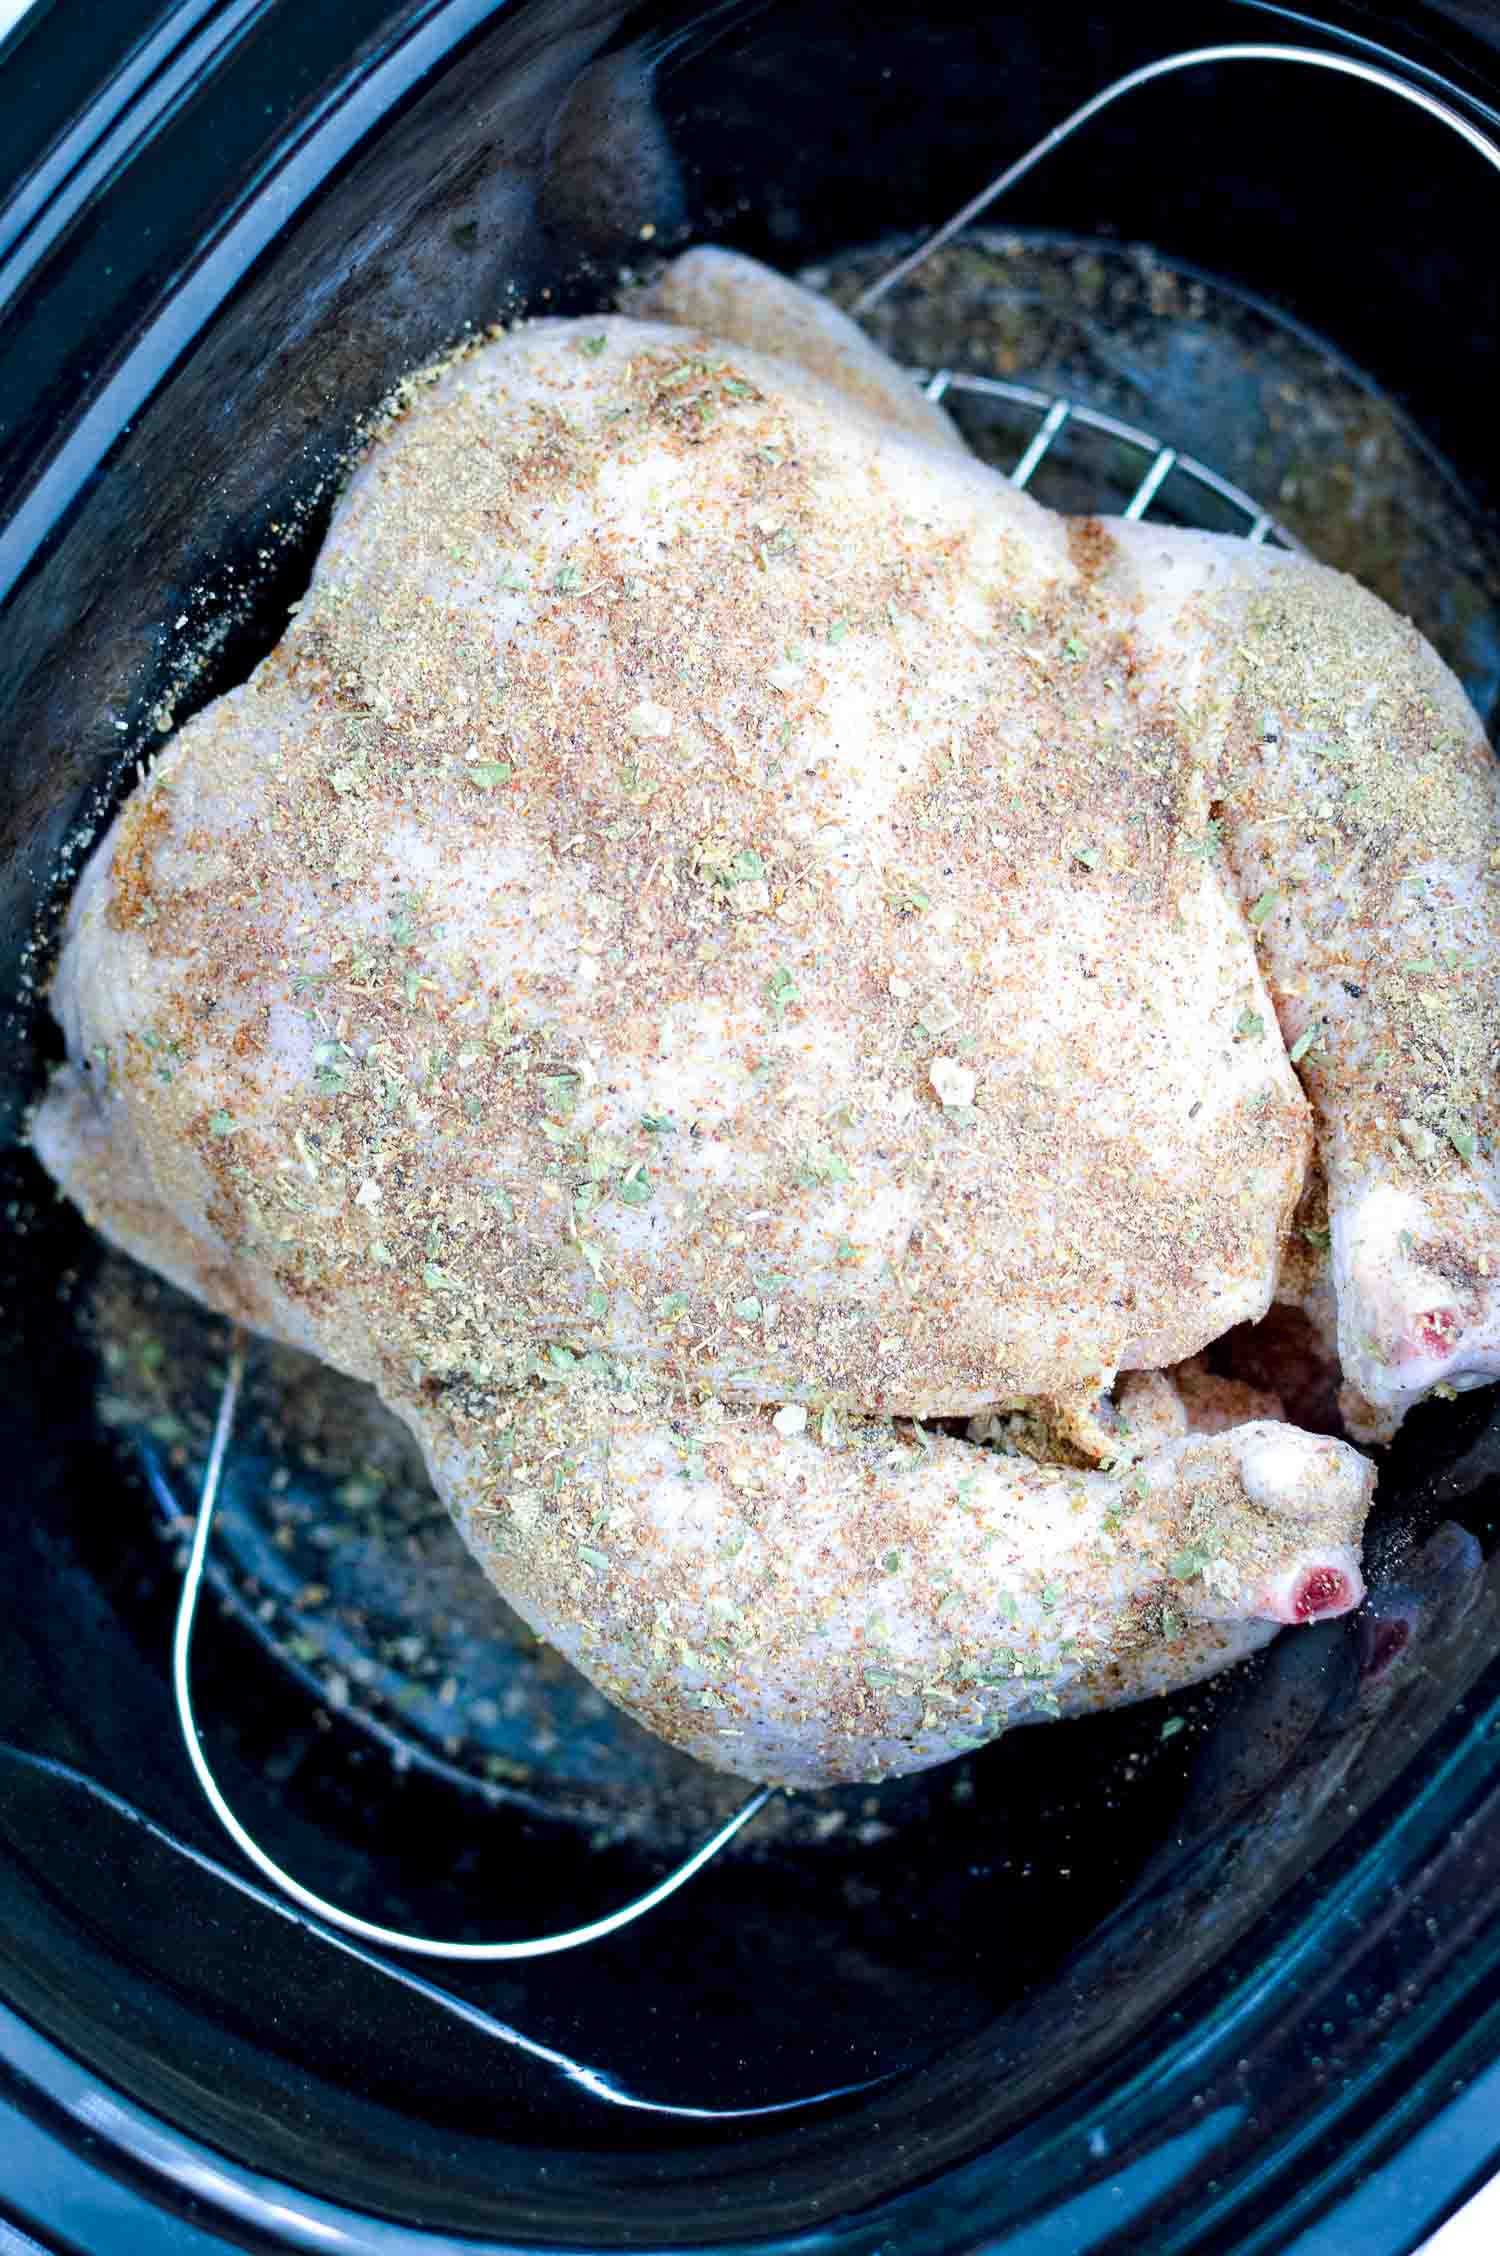 A slow cooker with a raw whole chicken rubbed with spices on it.